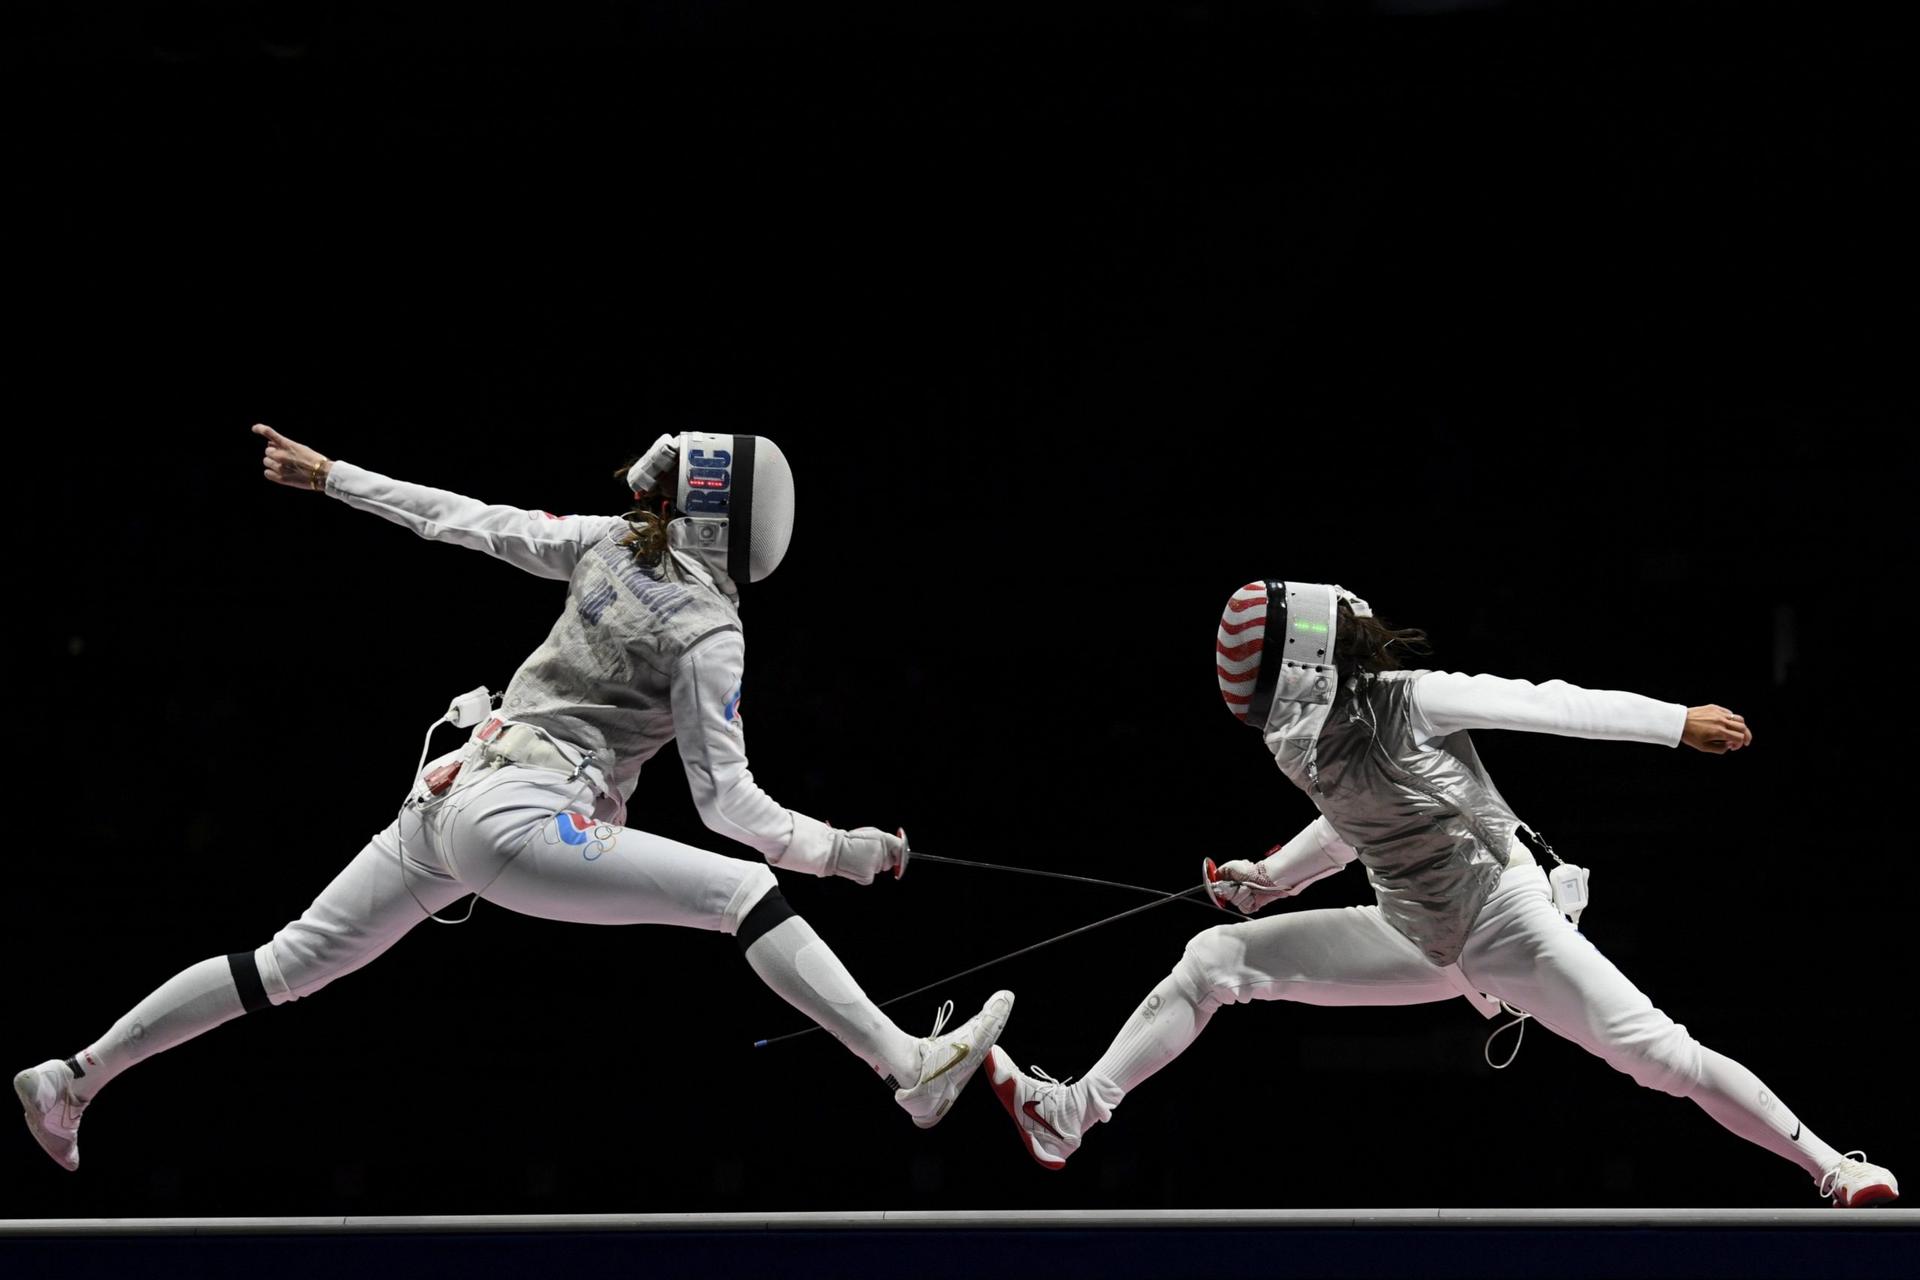 Notre Dame alum is first American to win individual gold in foil fencing